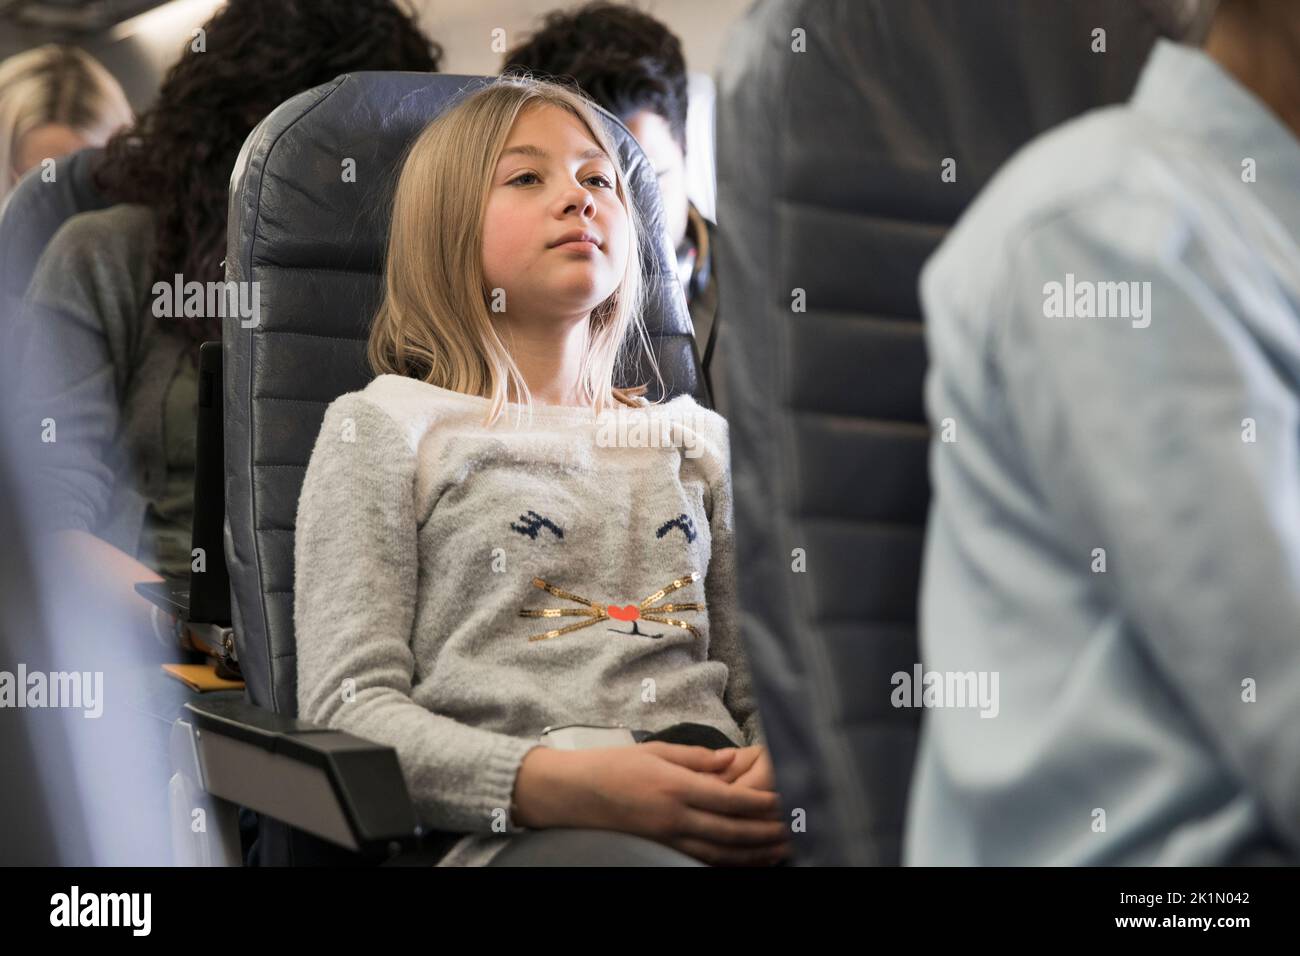 Preteen girl riding in airplane Stock Photo